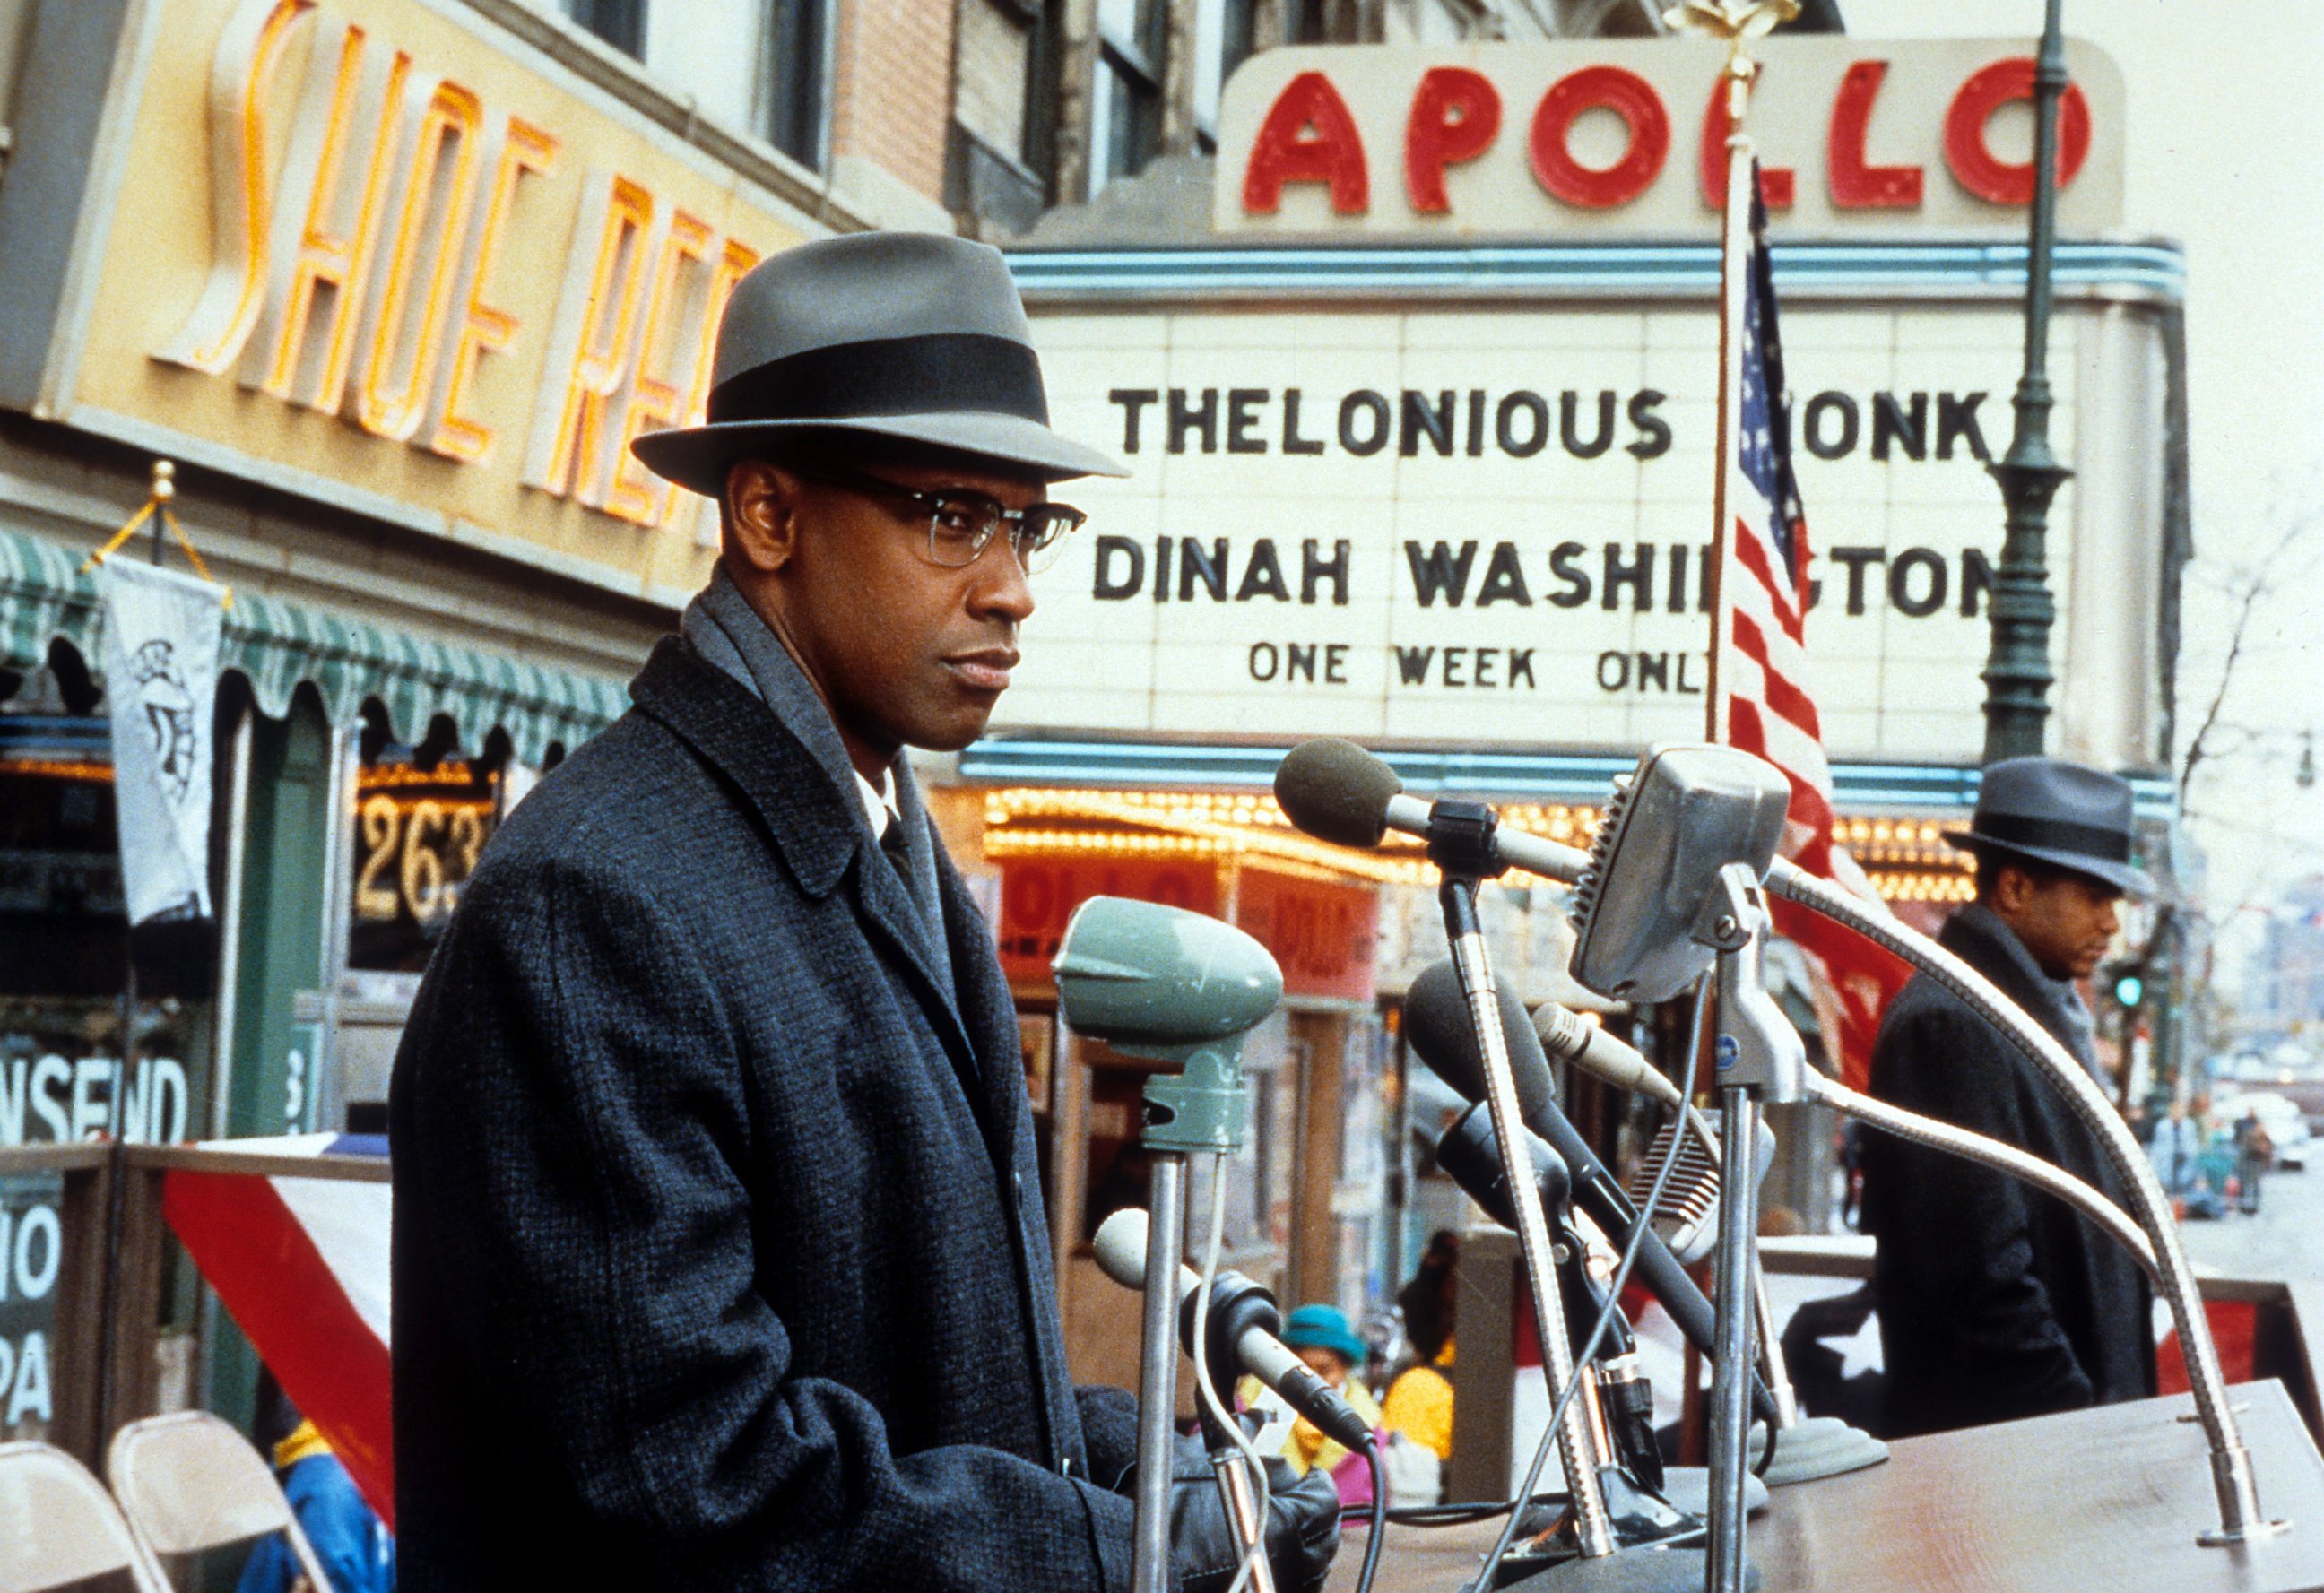 PHOTO: Denzel Washington standing behind microphones in a scene from the film 'Malcom X', 1992. 